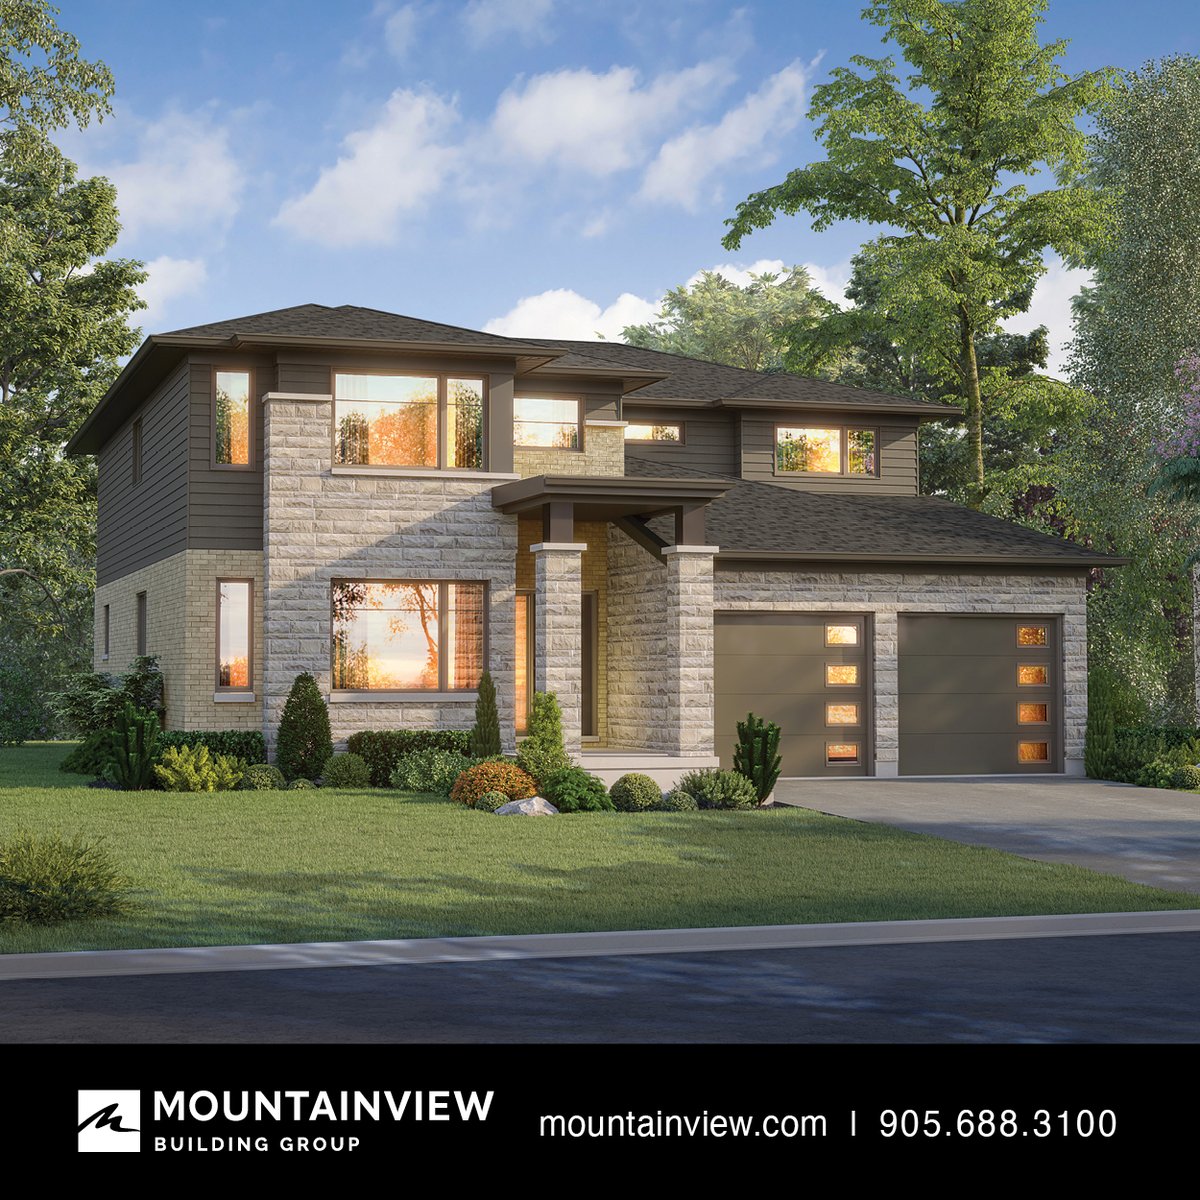 Love a modern style? Then you’ll love our the Mountainview Modern Collection. Clean lines, expansive windows, and an undeniable sleekness, like our Iris model that’s pictured here!

#modern #moderndesign #niagara #homebuilder #MountainviewBuildingGroup #MountainviewHomes